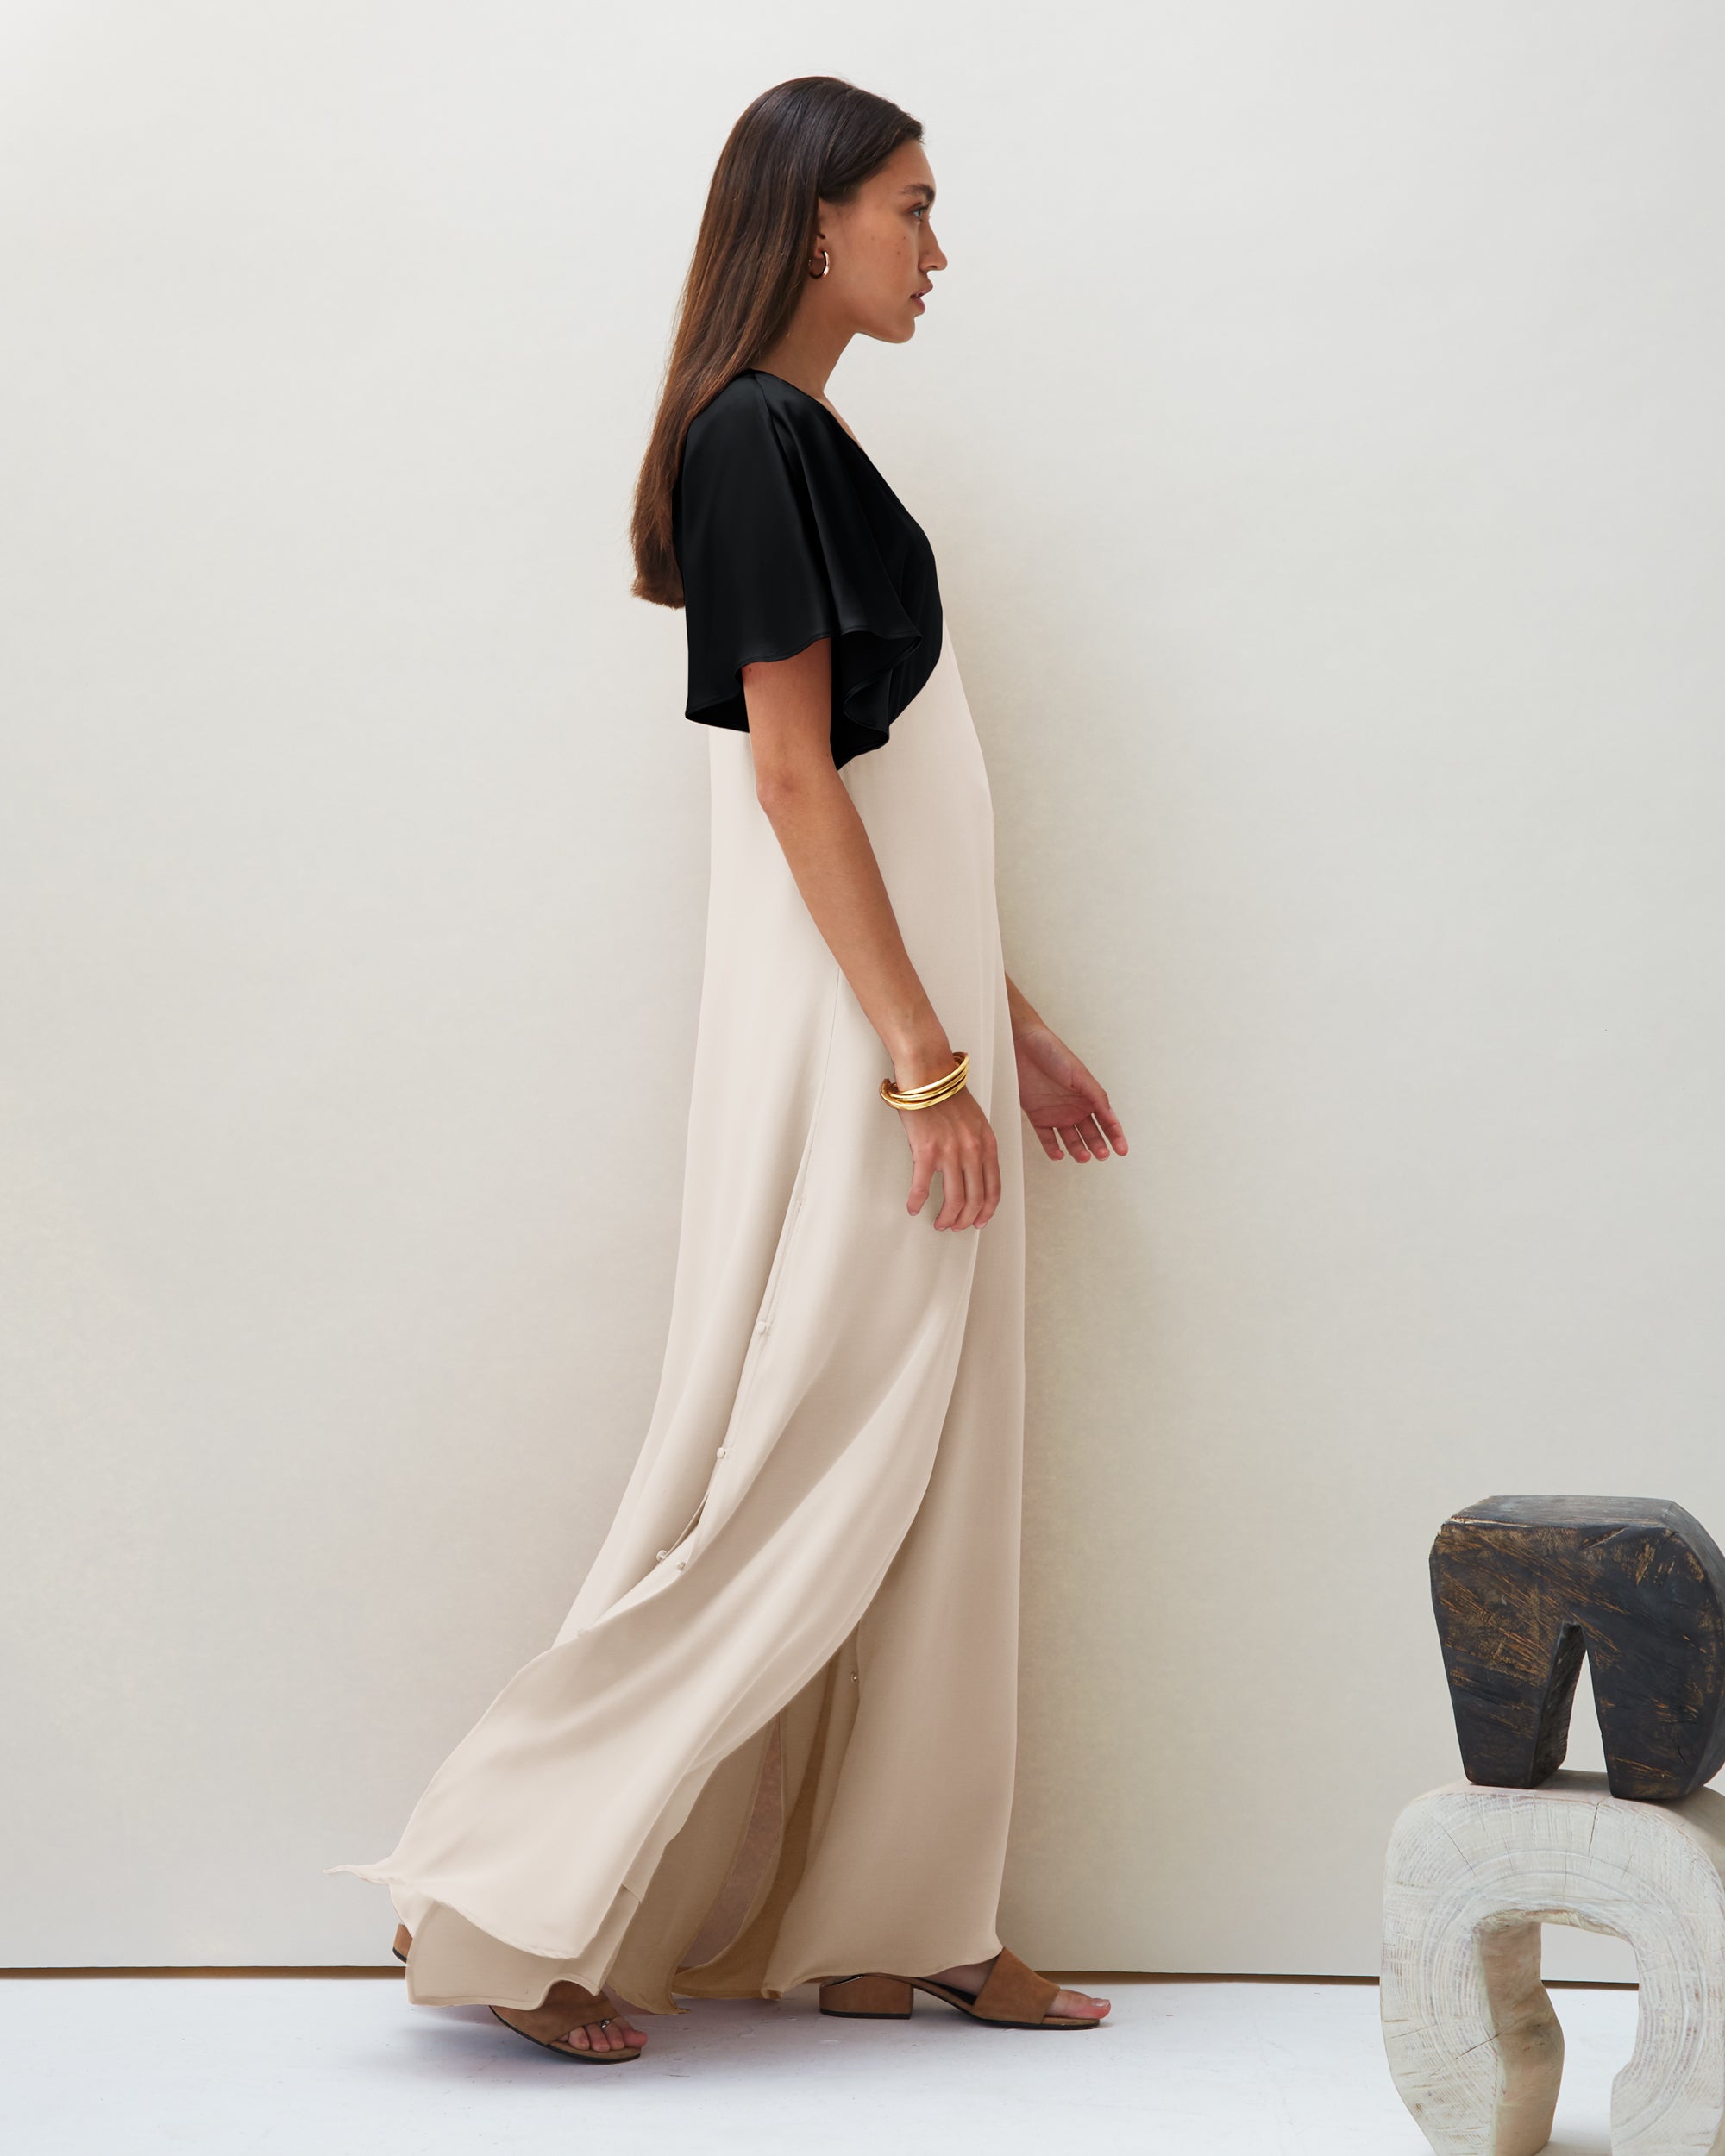 Seta Gown in Black & Ivory | Made-to-order